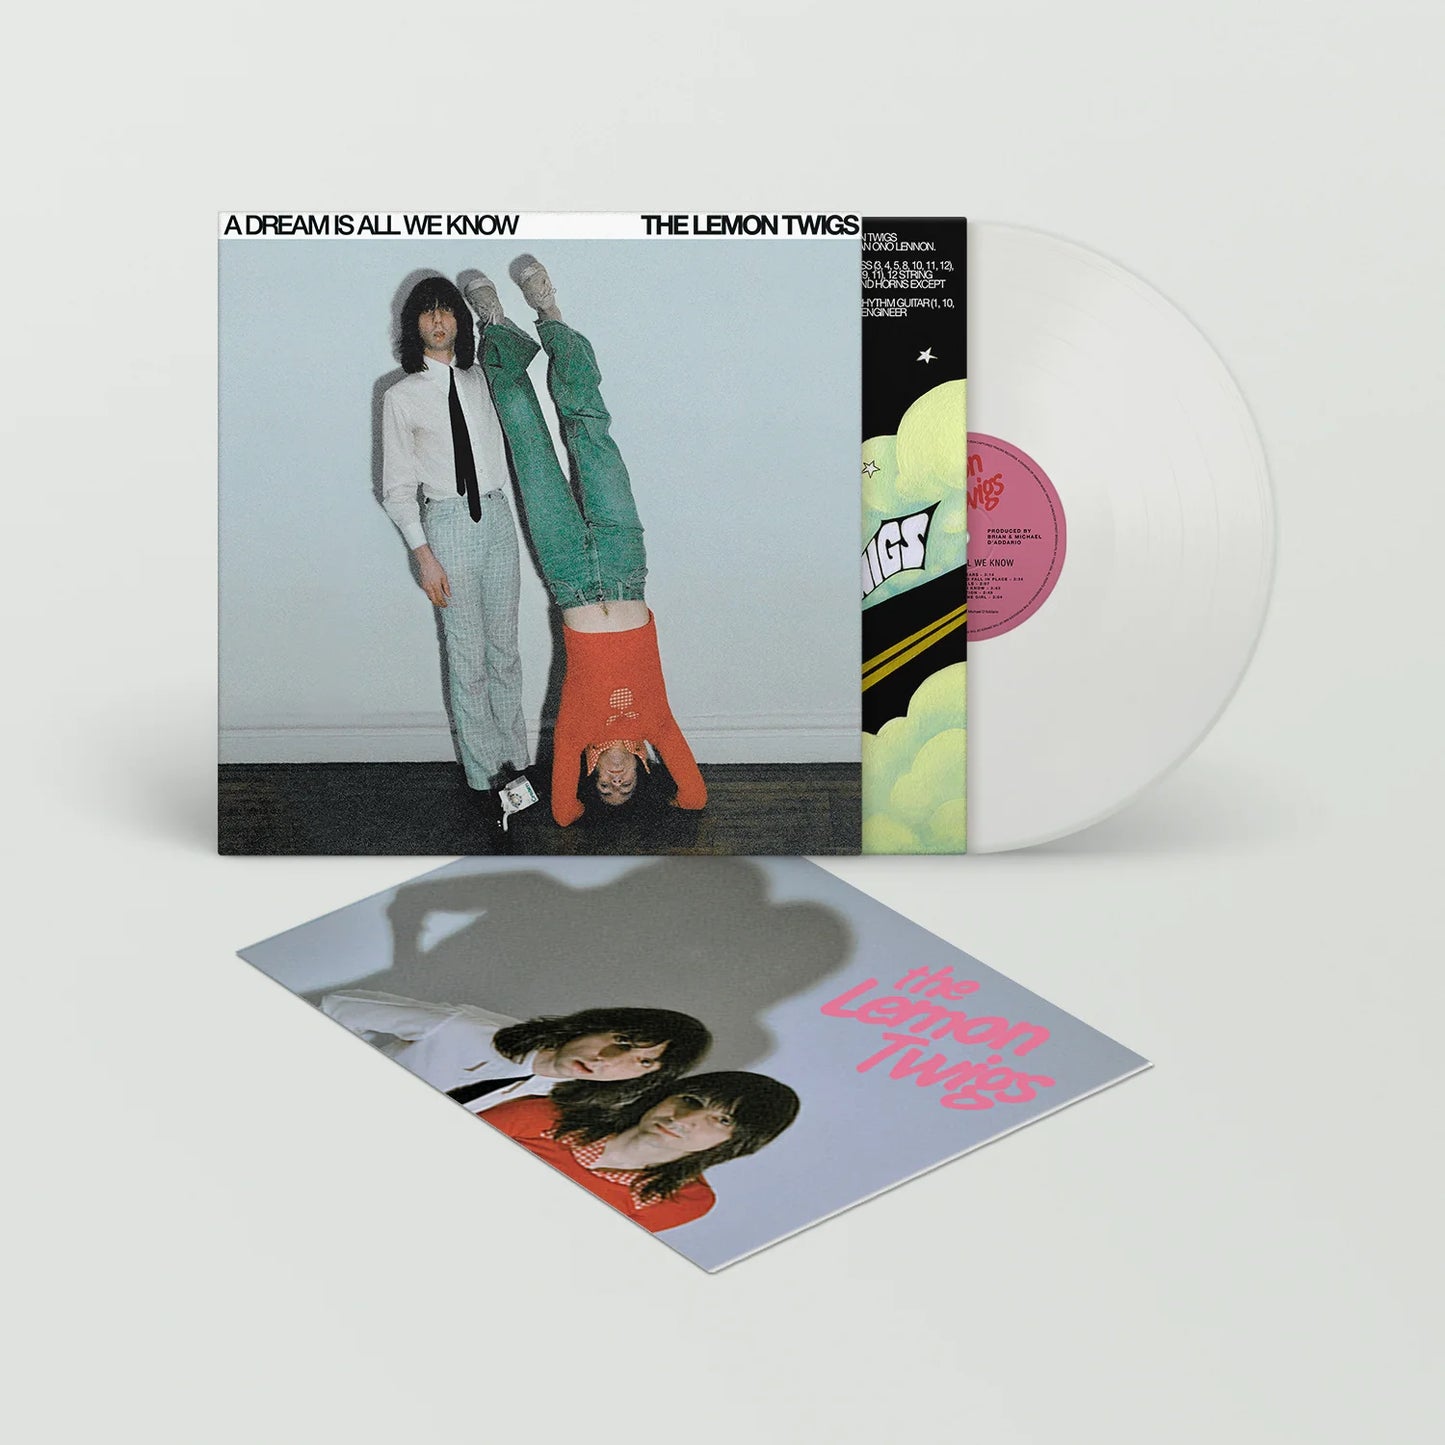 The Lemon Twigs: A DREAM IS ALL WE KNOW (Ice Cream Vinyl)